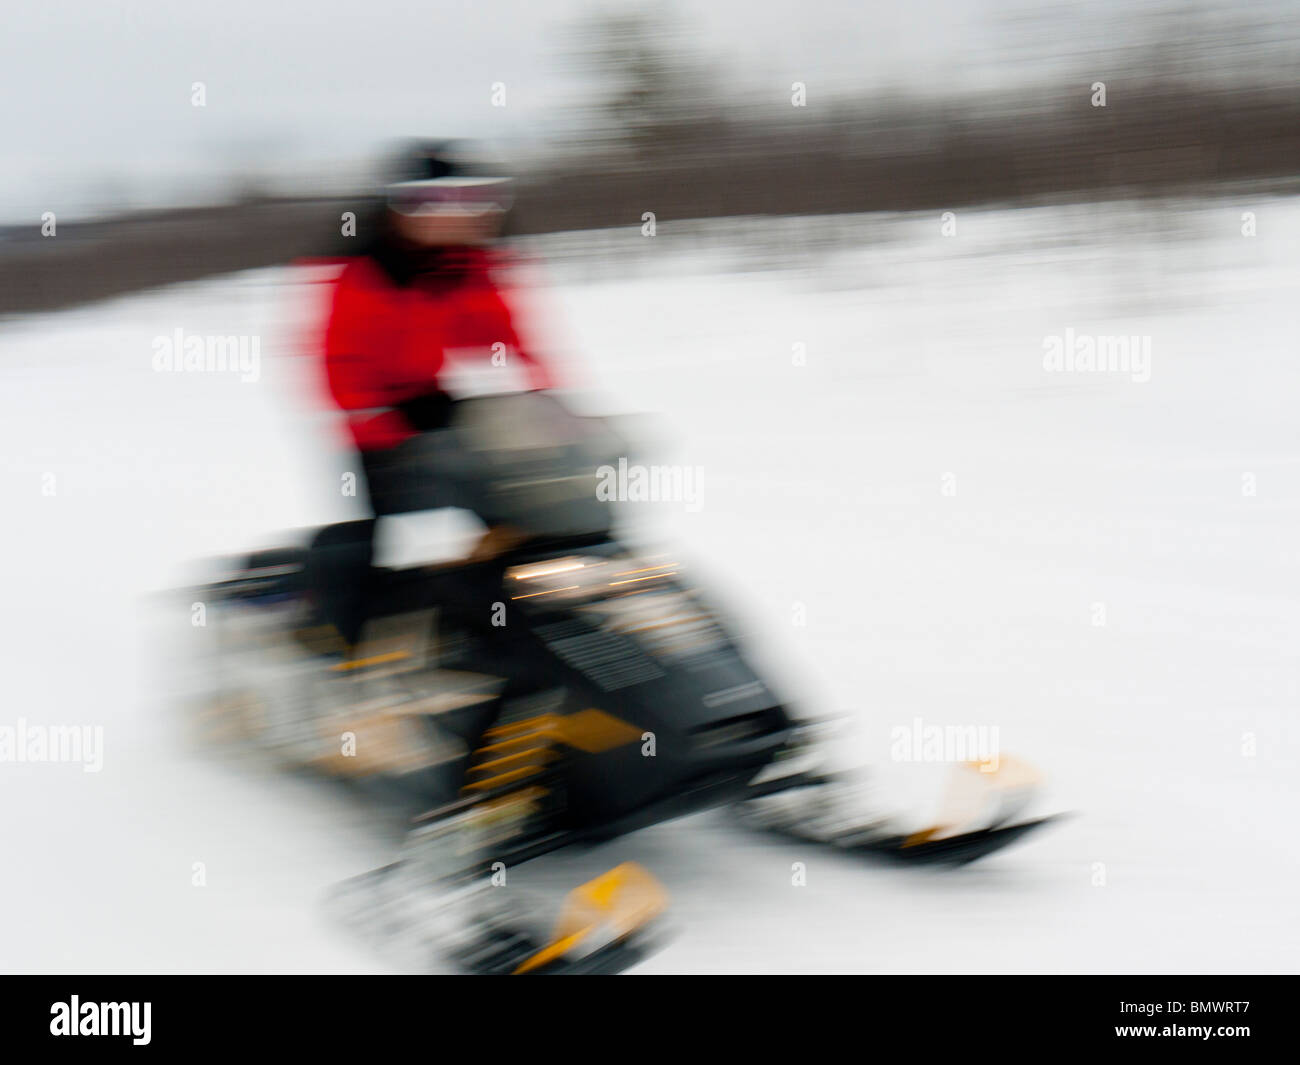 A young man drives a snow mobile through the snow at Kiruna, Lapland, Northern Sweden. Stock Photo